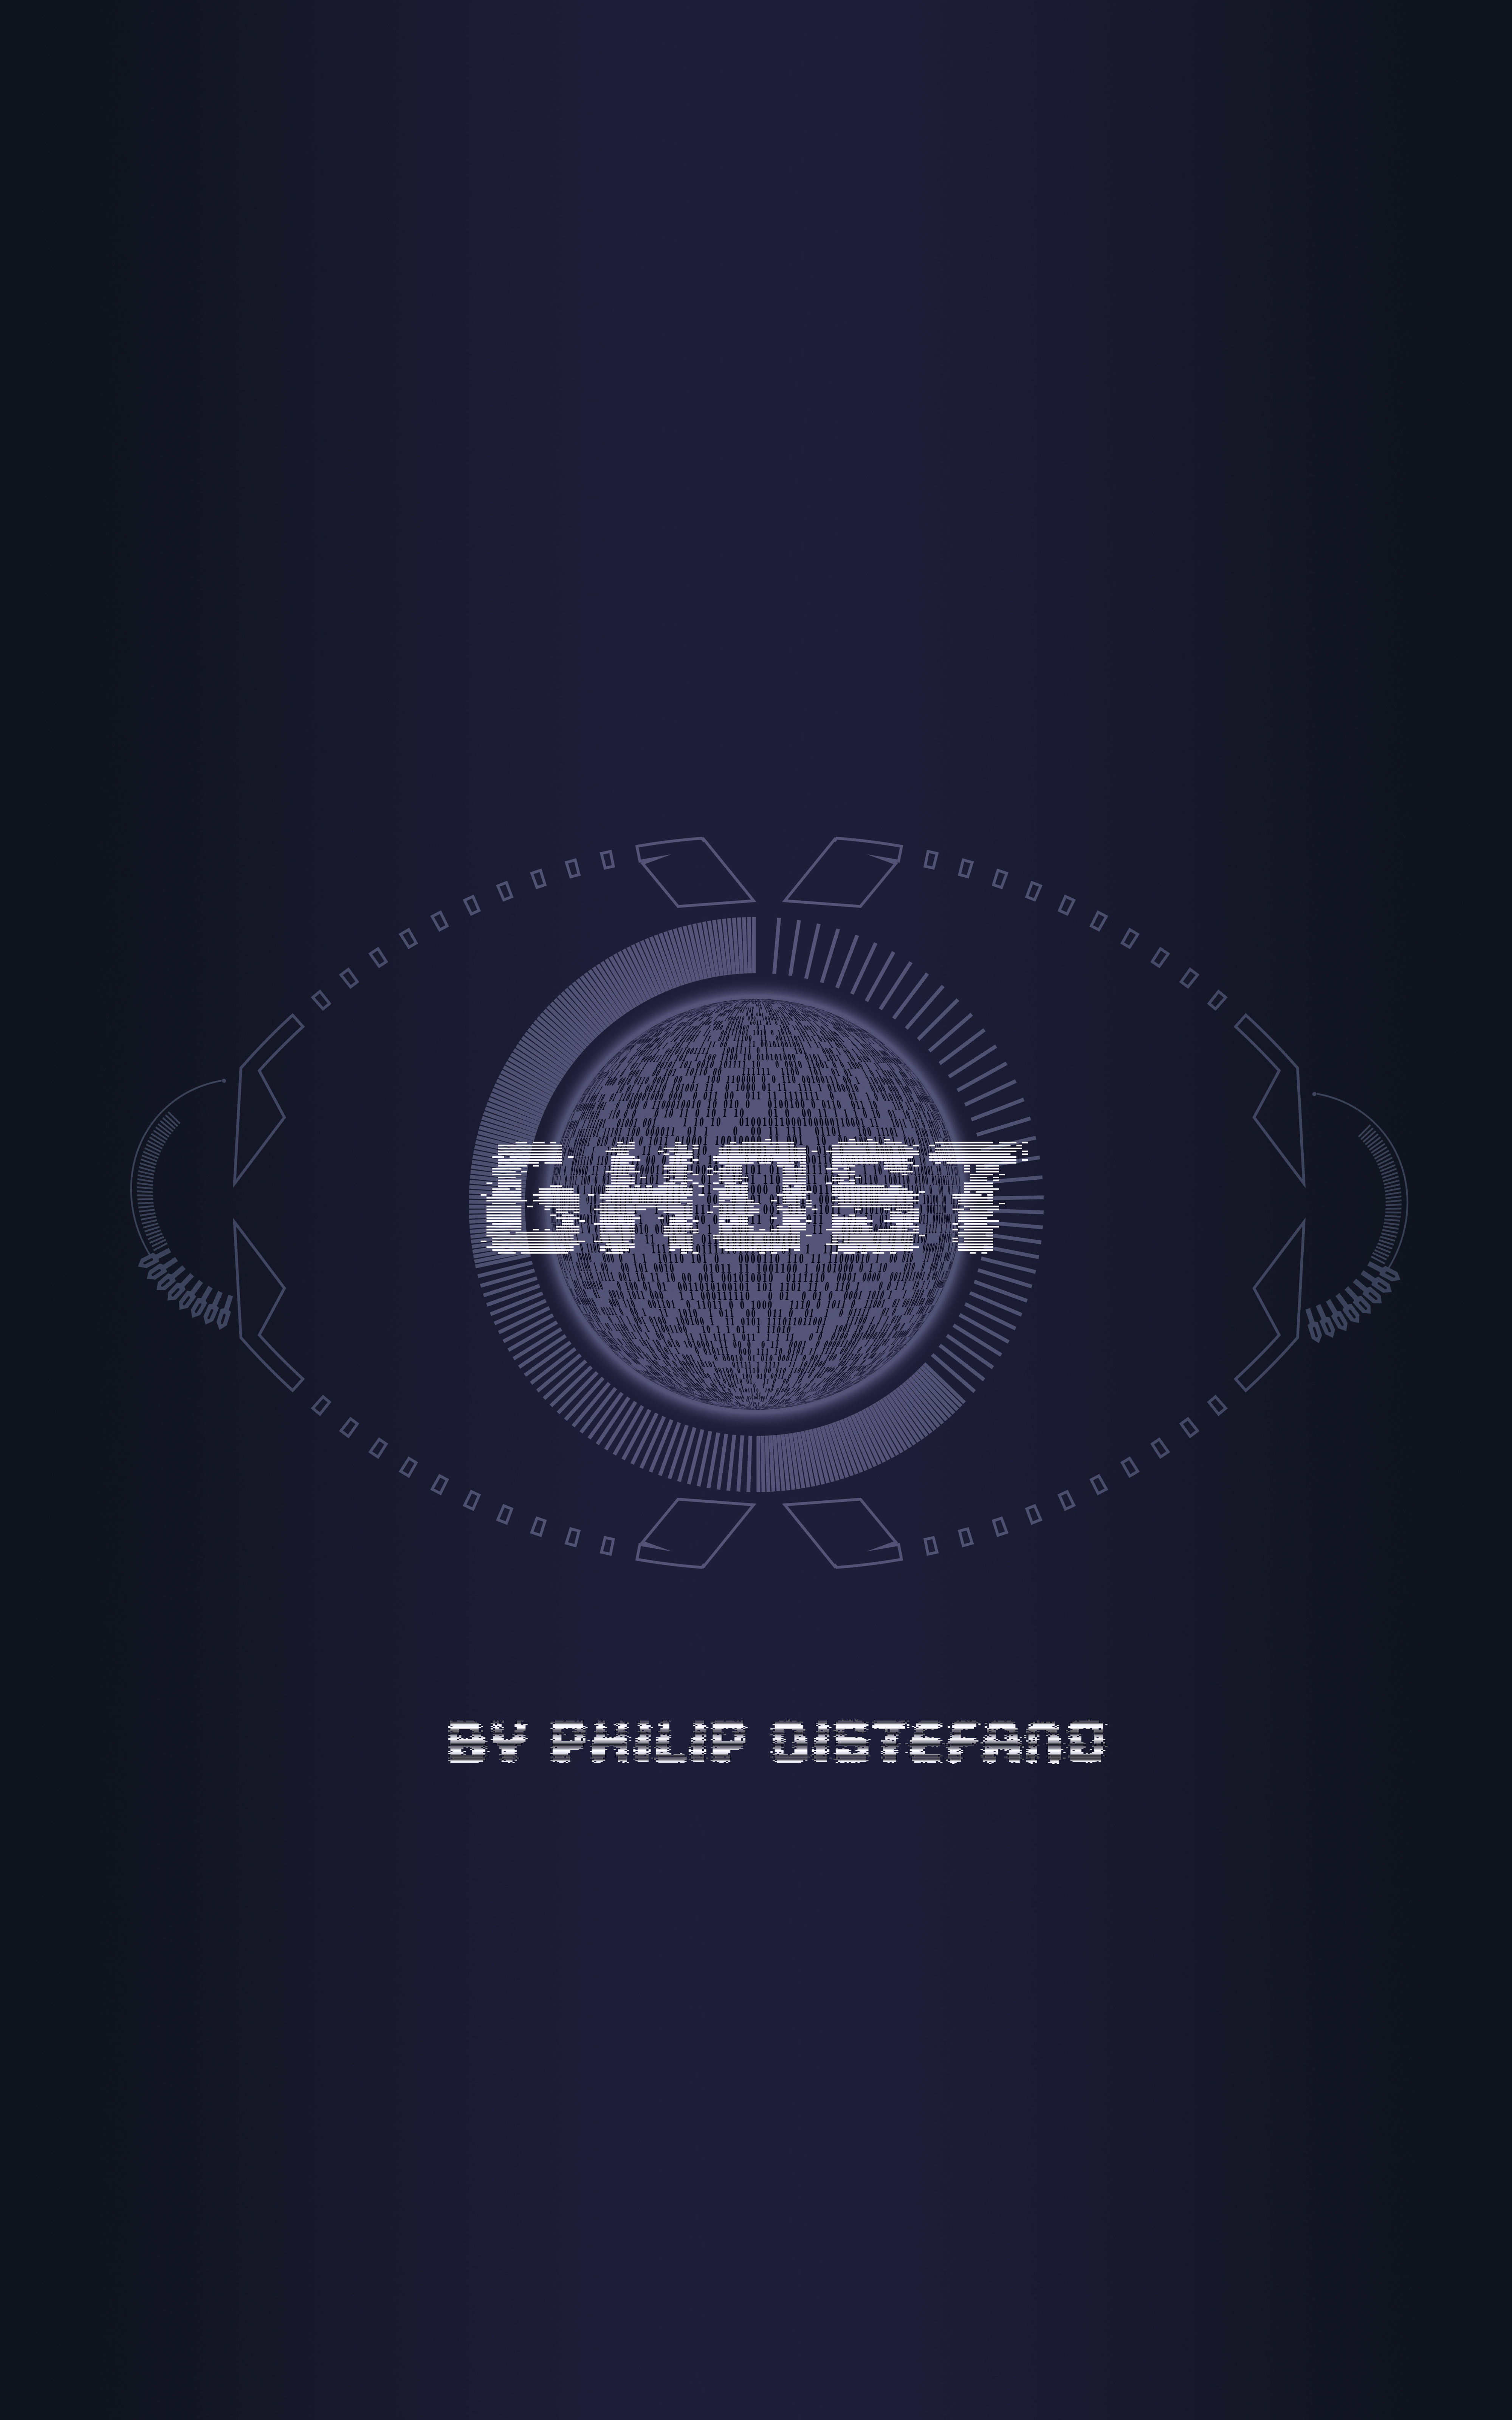 Ghost front cover